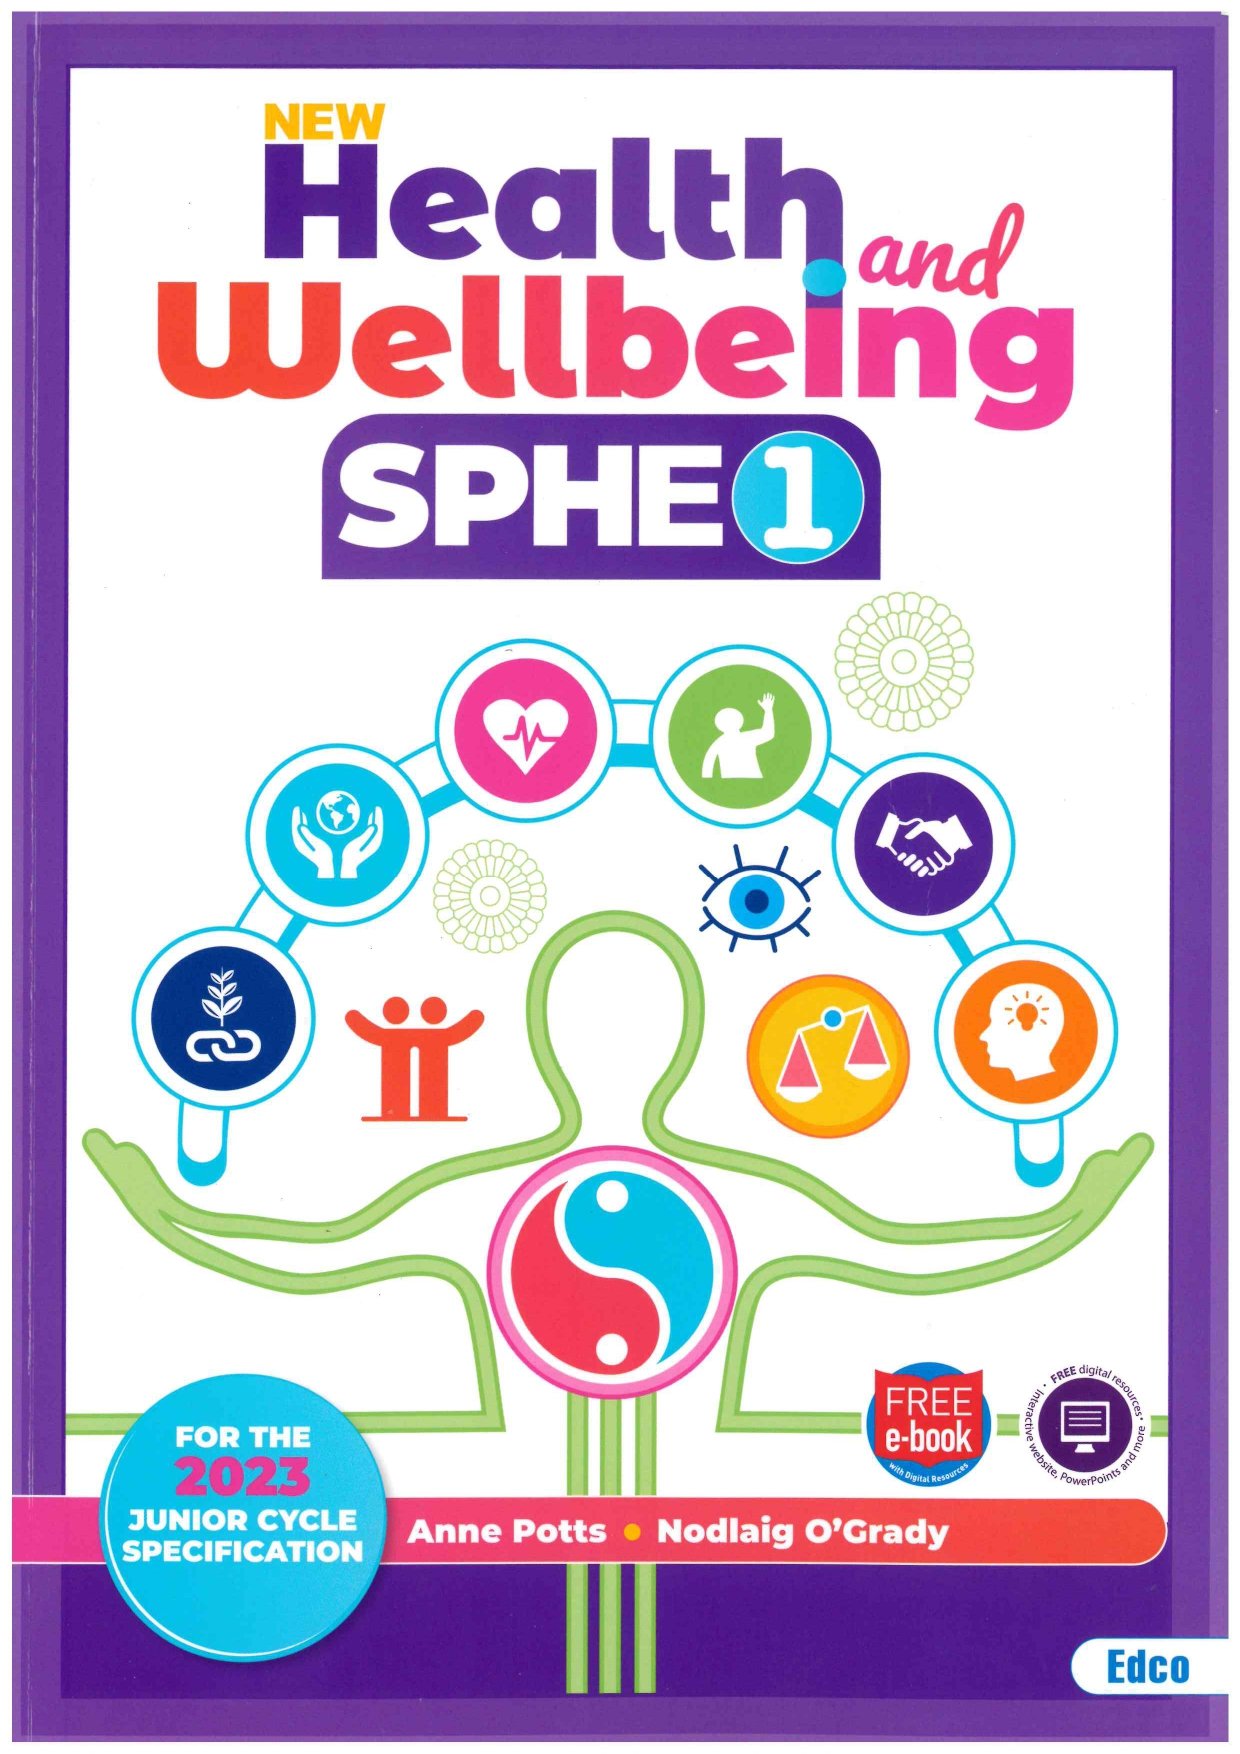 SPHE Textbook EdCo Cover Page - Health and Wellbeing SPHE 1 2023_page-0001.jpeg